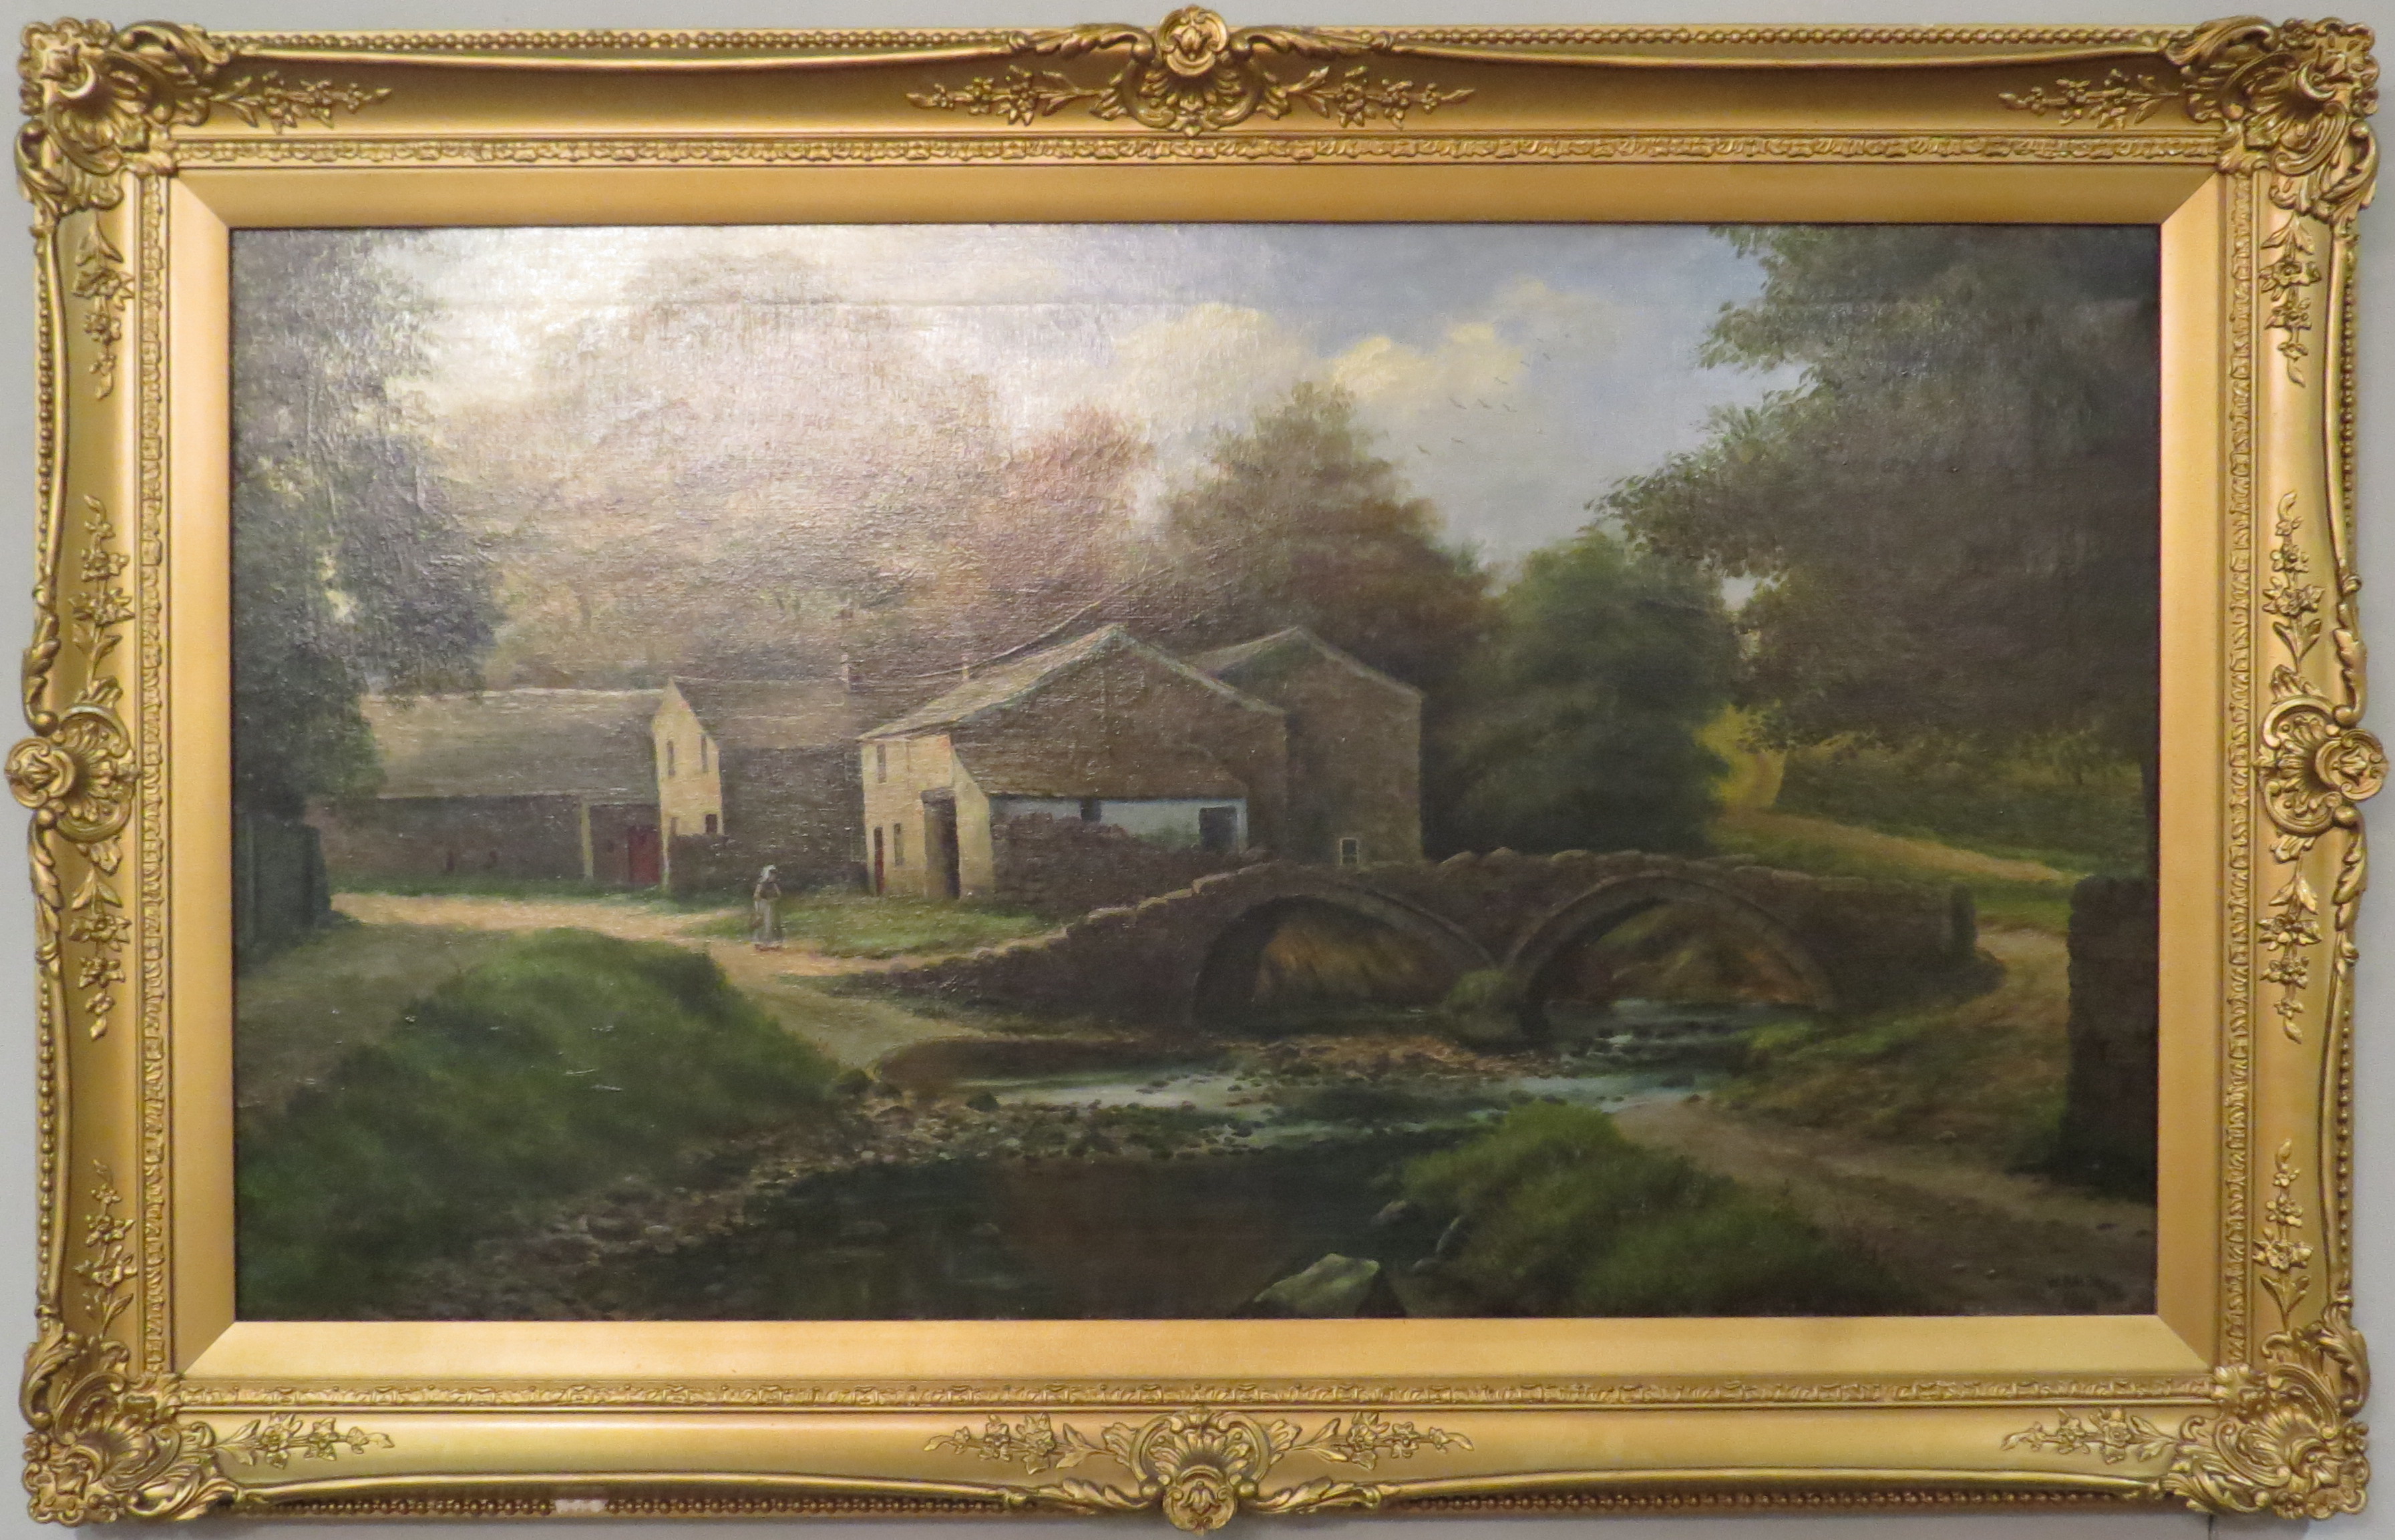 Oil on Canvas of a Country Village, Signed W. Baldwin (1926)